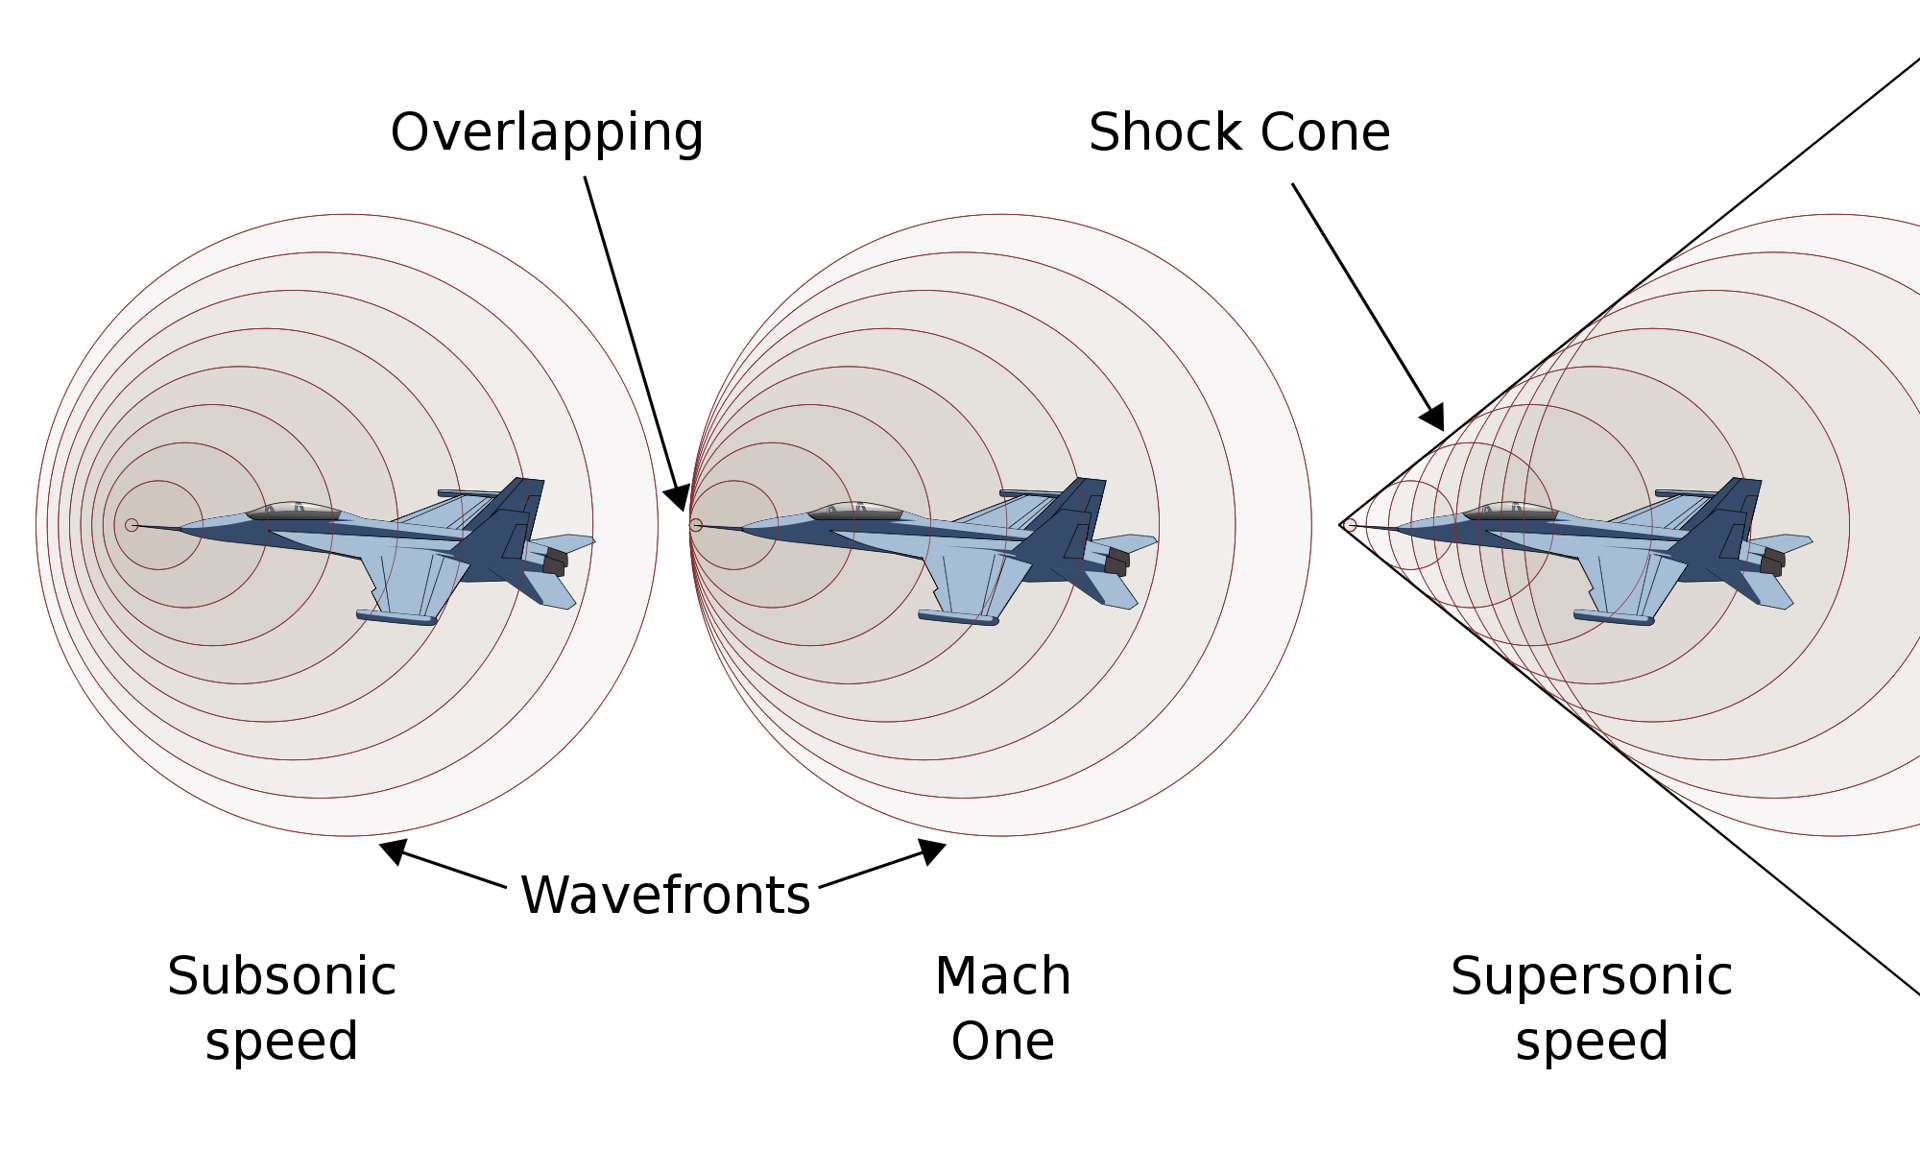 noise level supersonic vs subsonic